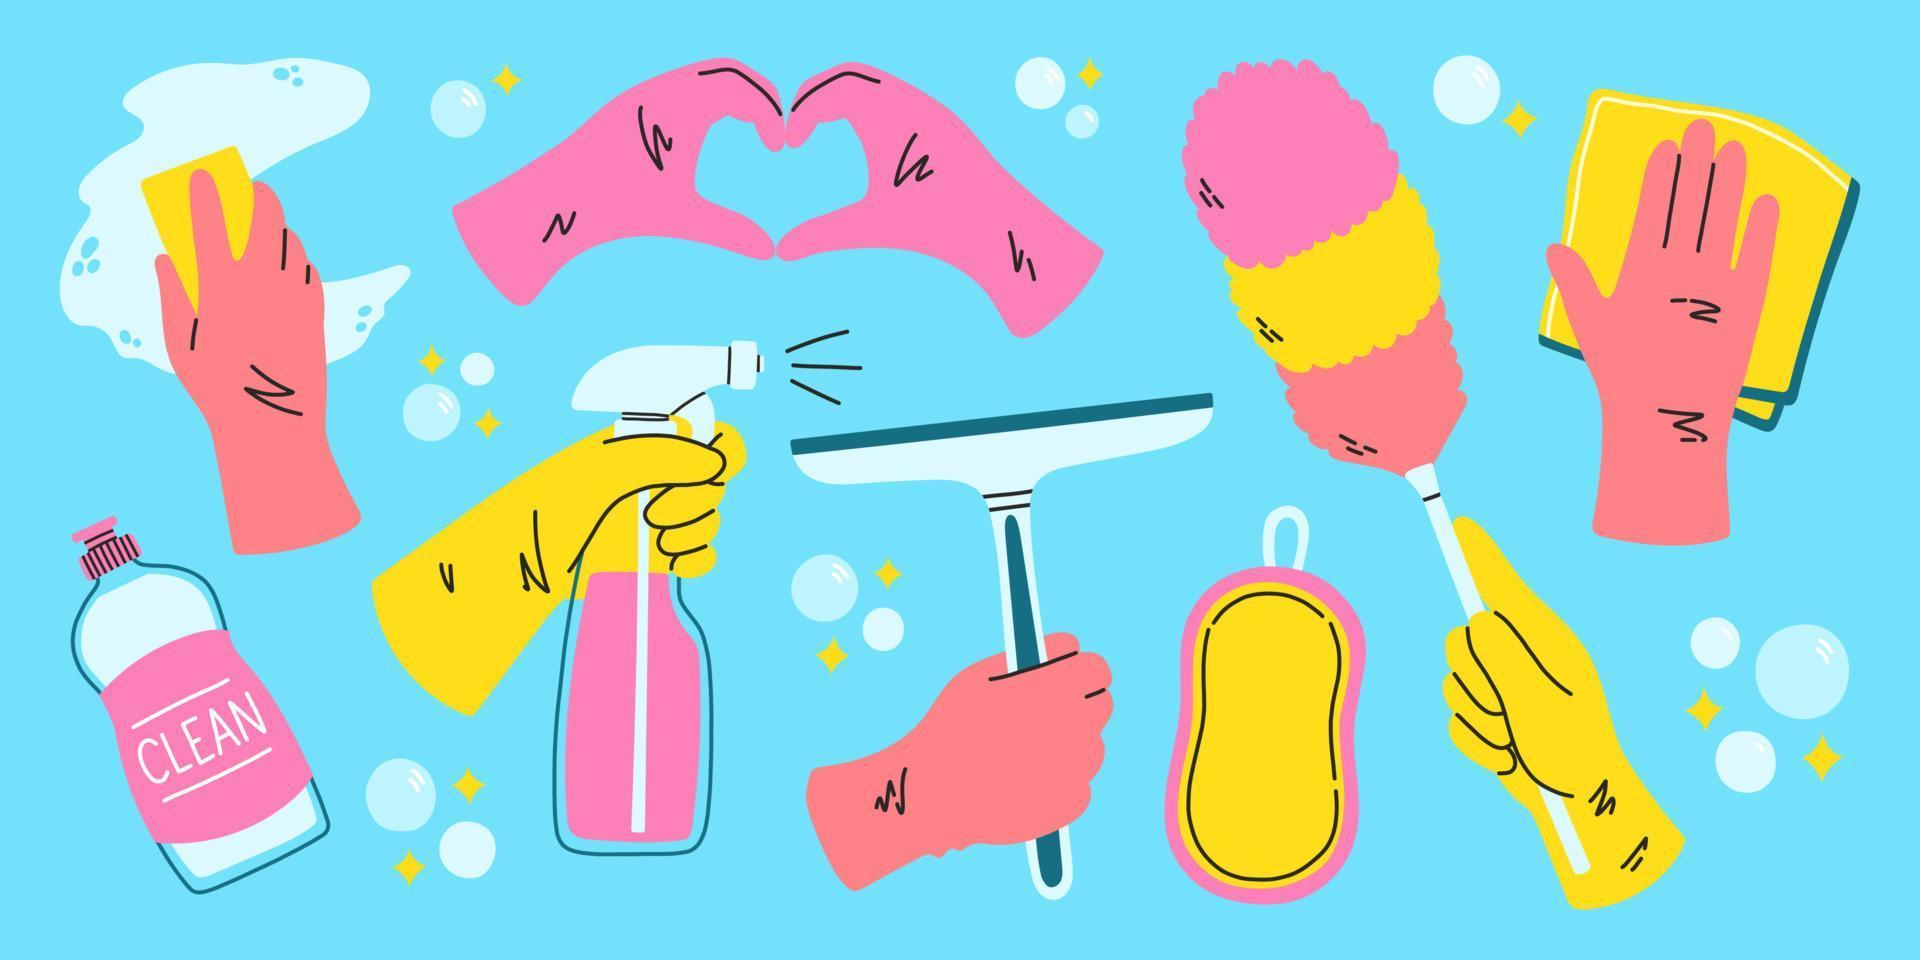 Cleaning set supplies, bottles, spray, sponge, gloves. Various Cleaning items. Housework concept. Hand drawn style vector